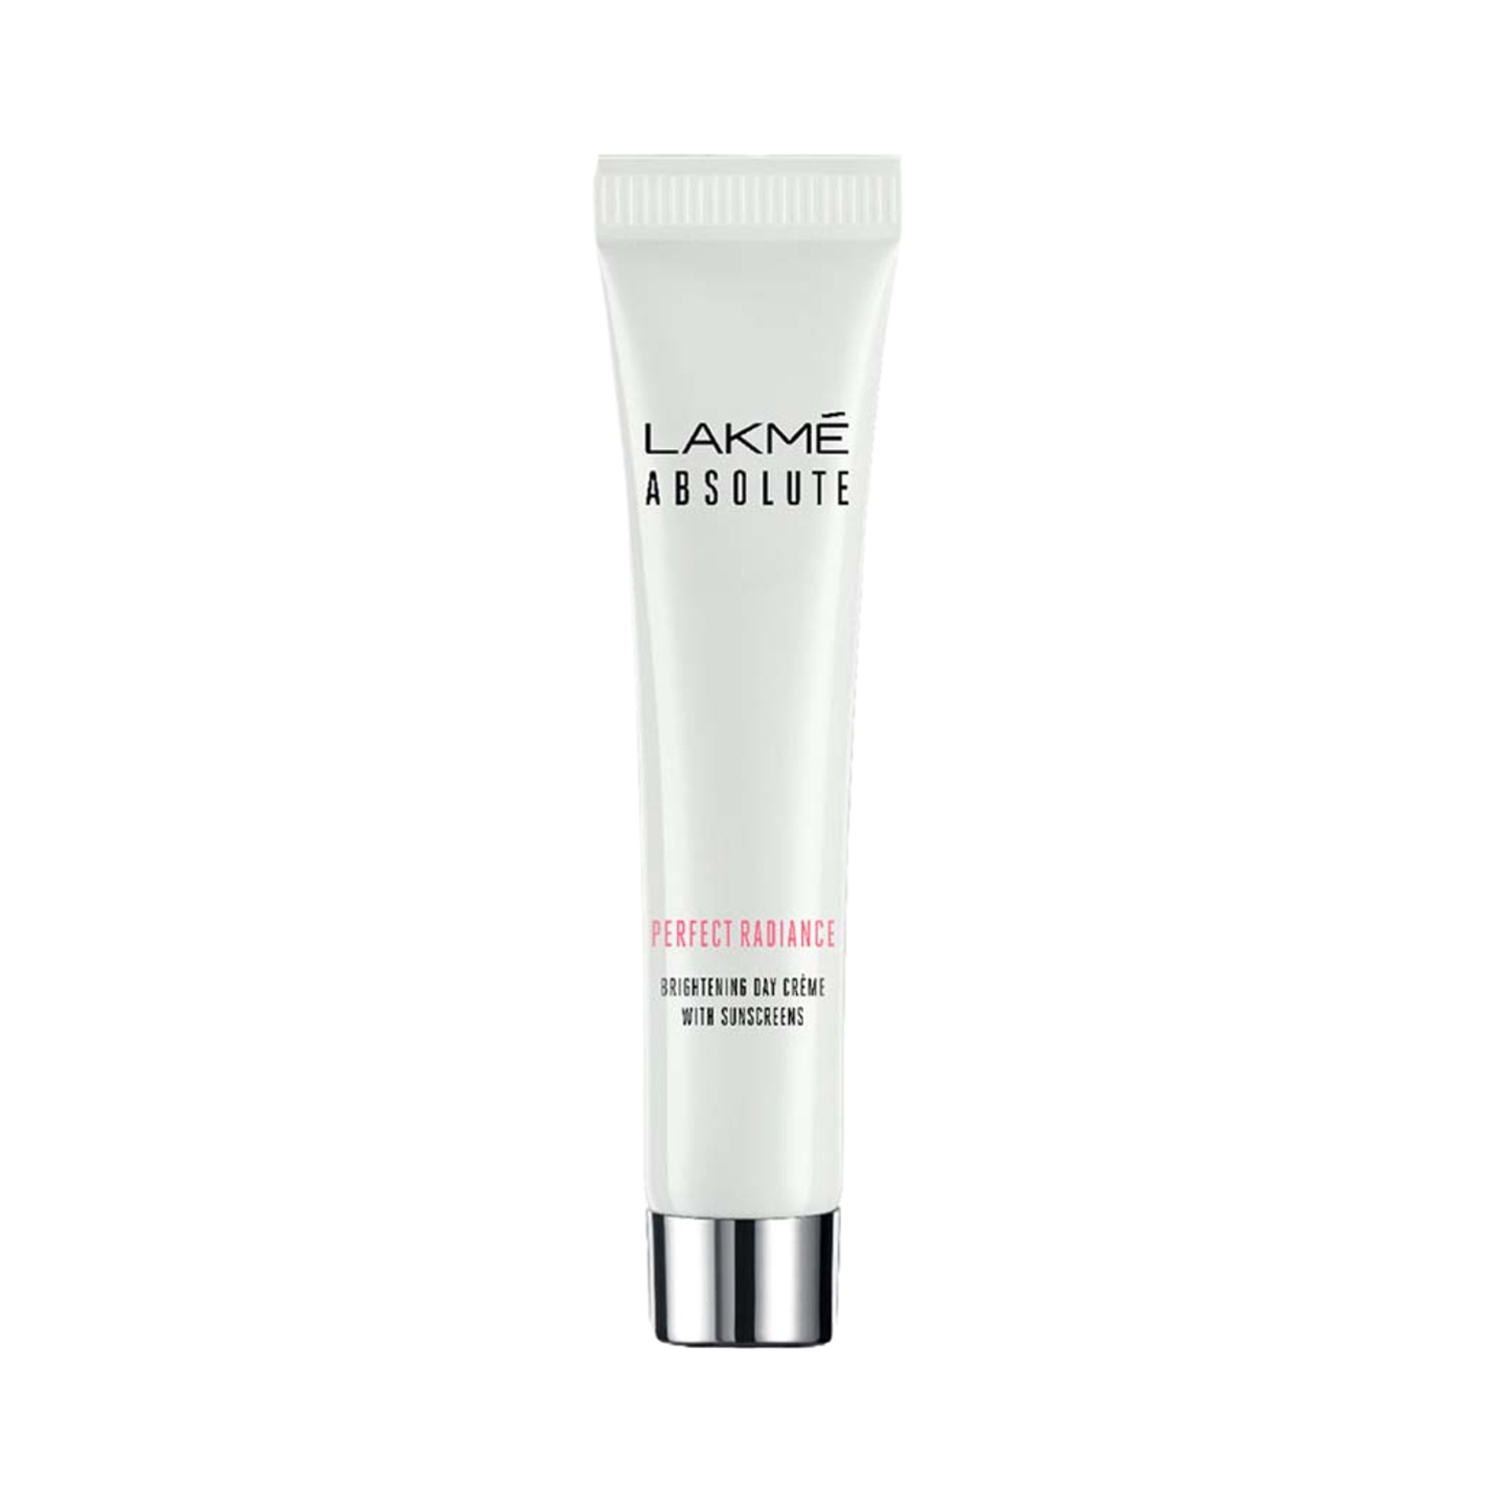 Lakme | Lakme Absolute Perfect Radiance Skin Brightening Day Creme (15g)